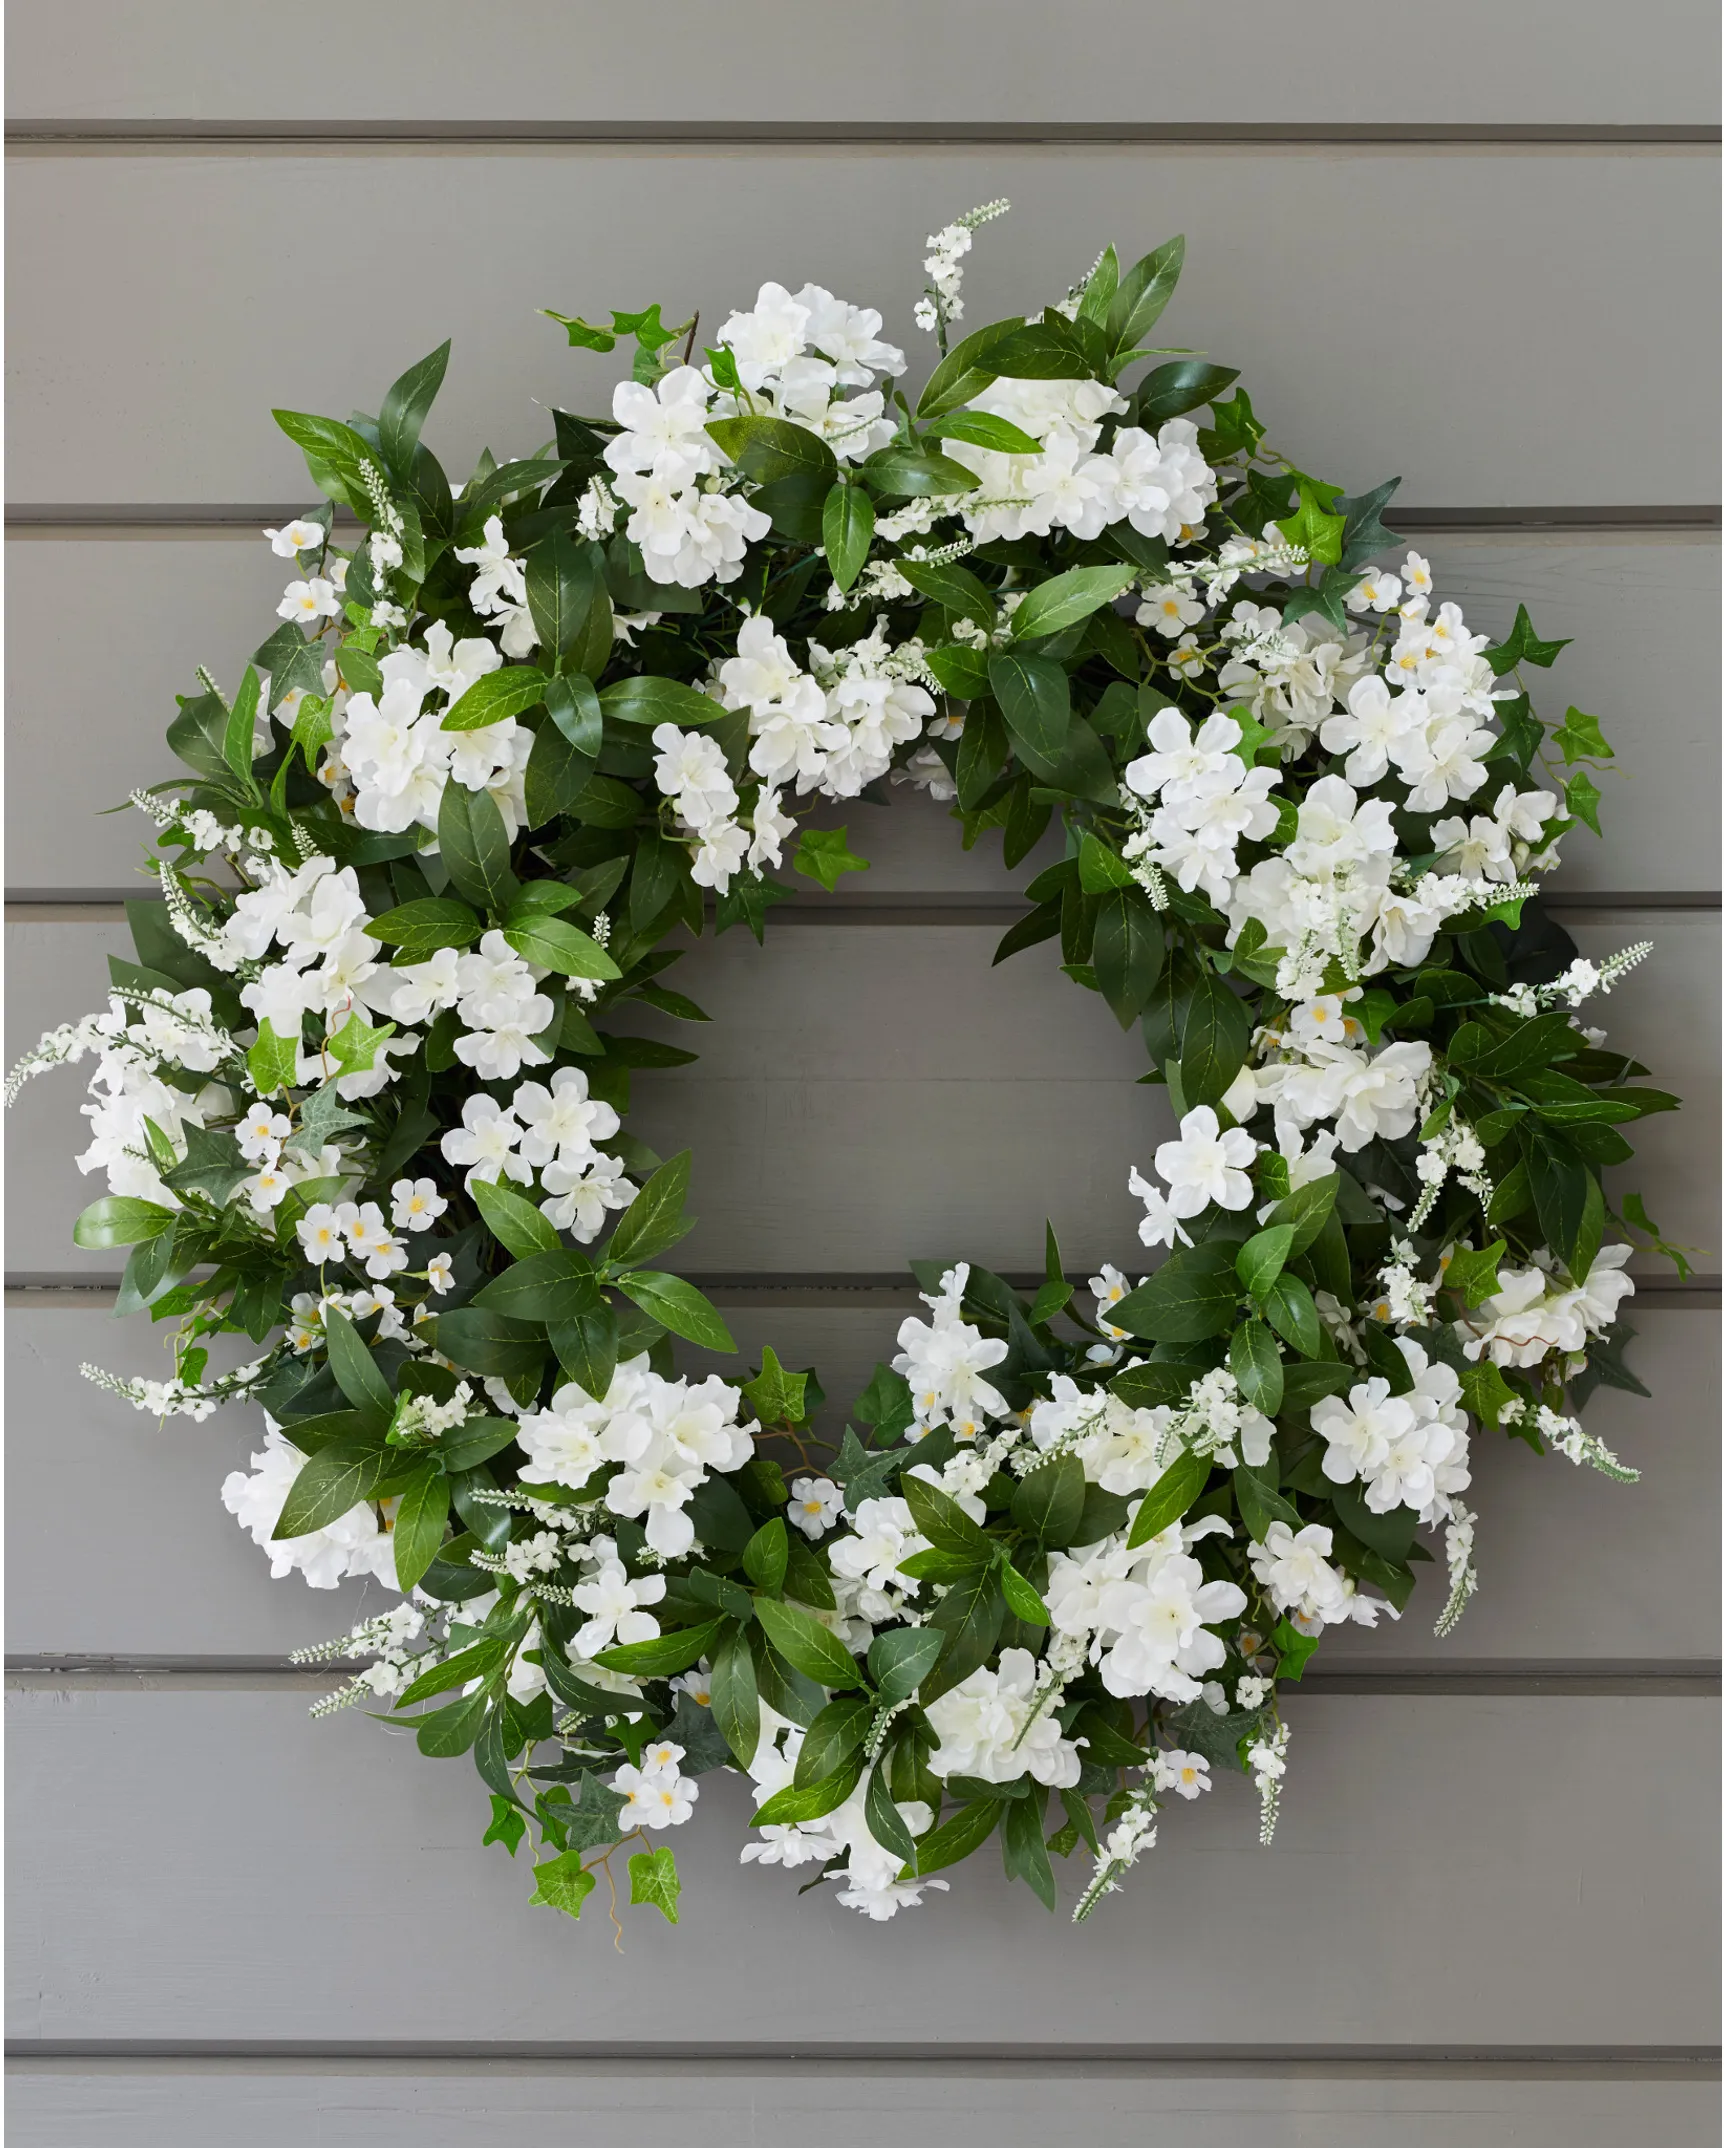 Outdoor White Rhapsody Wreaths and Greenery